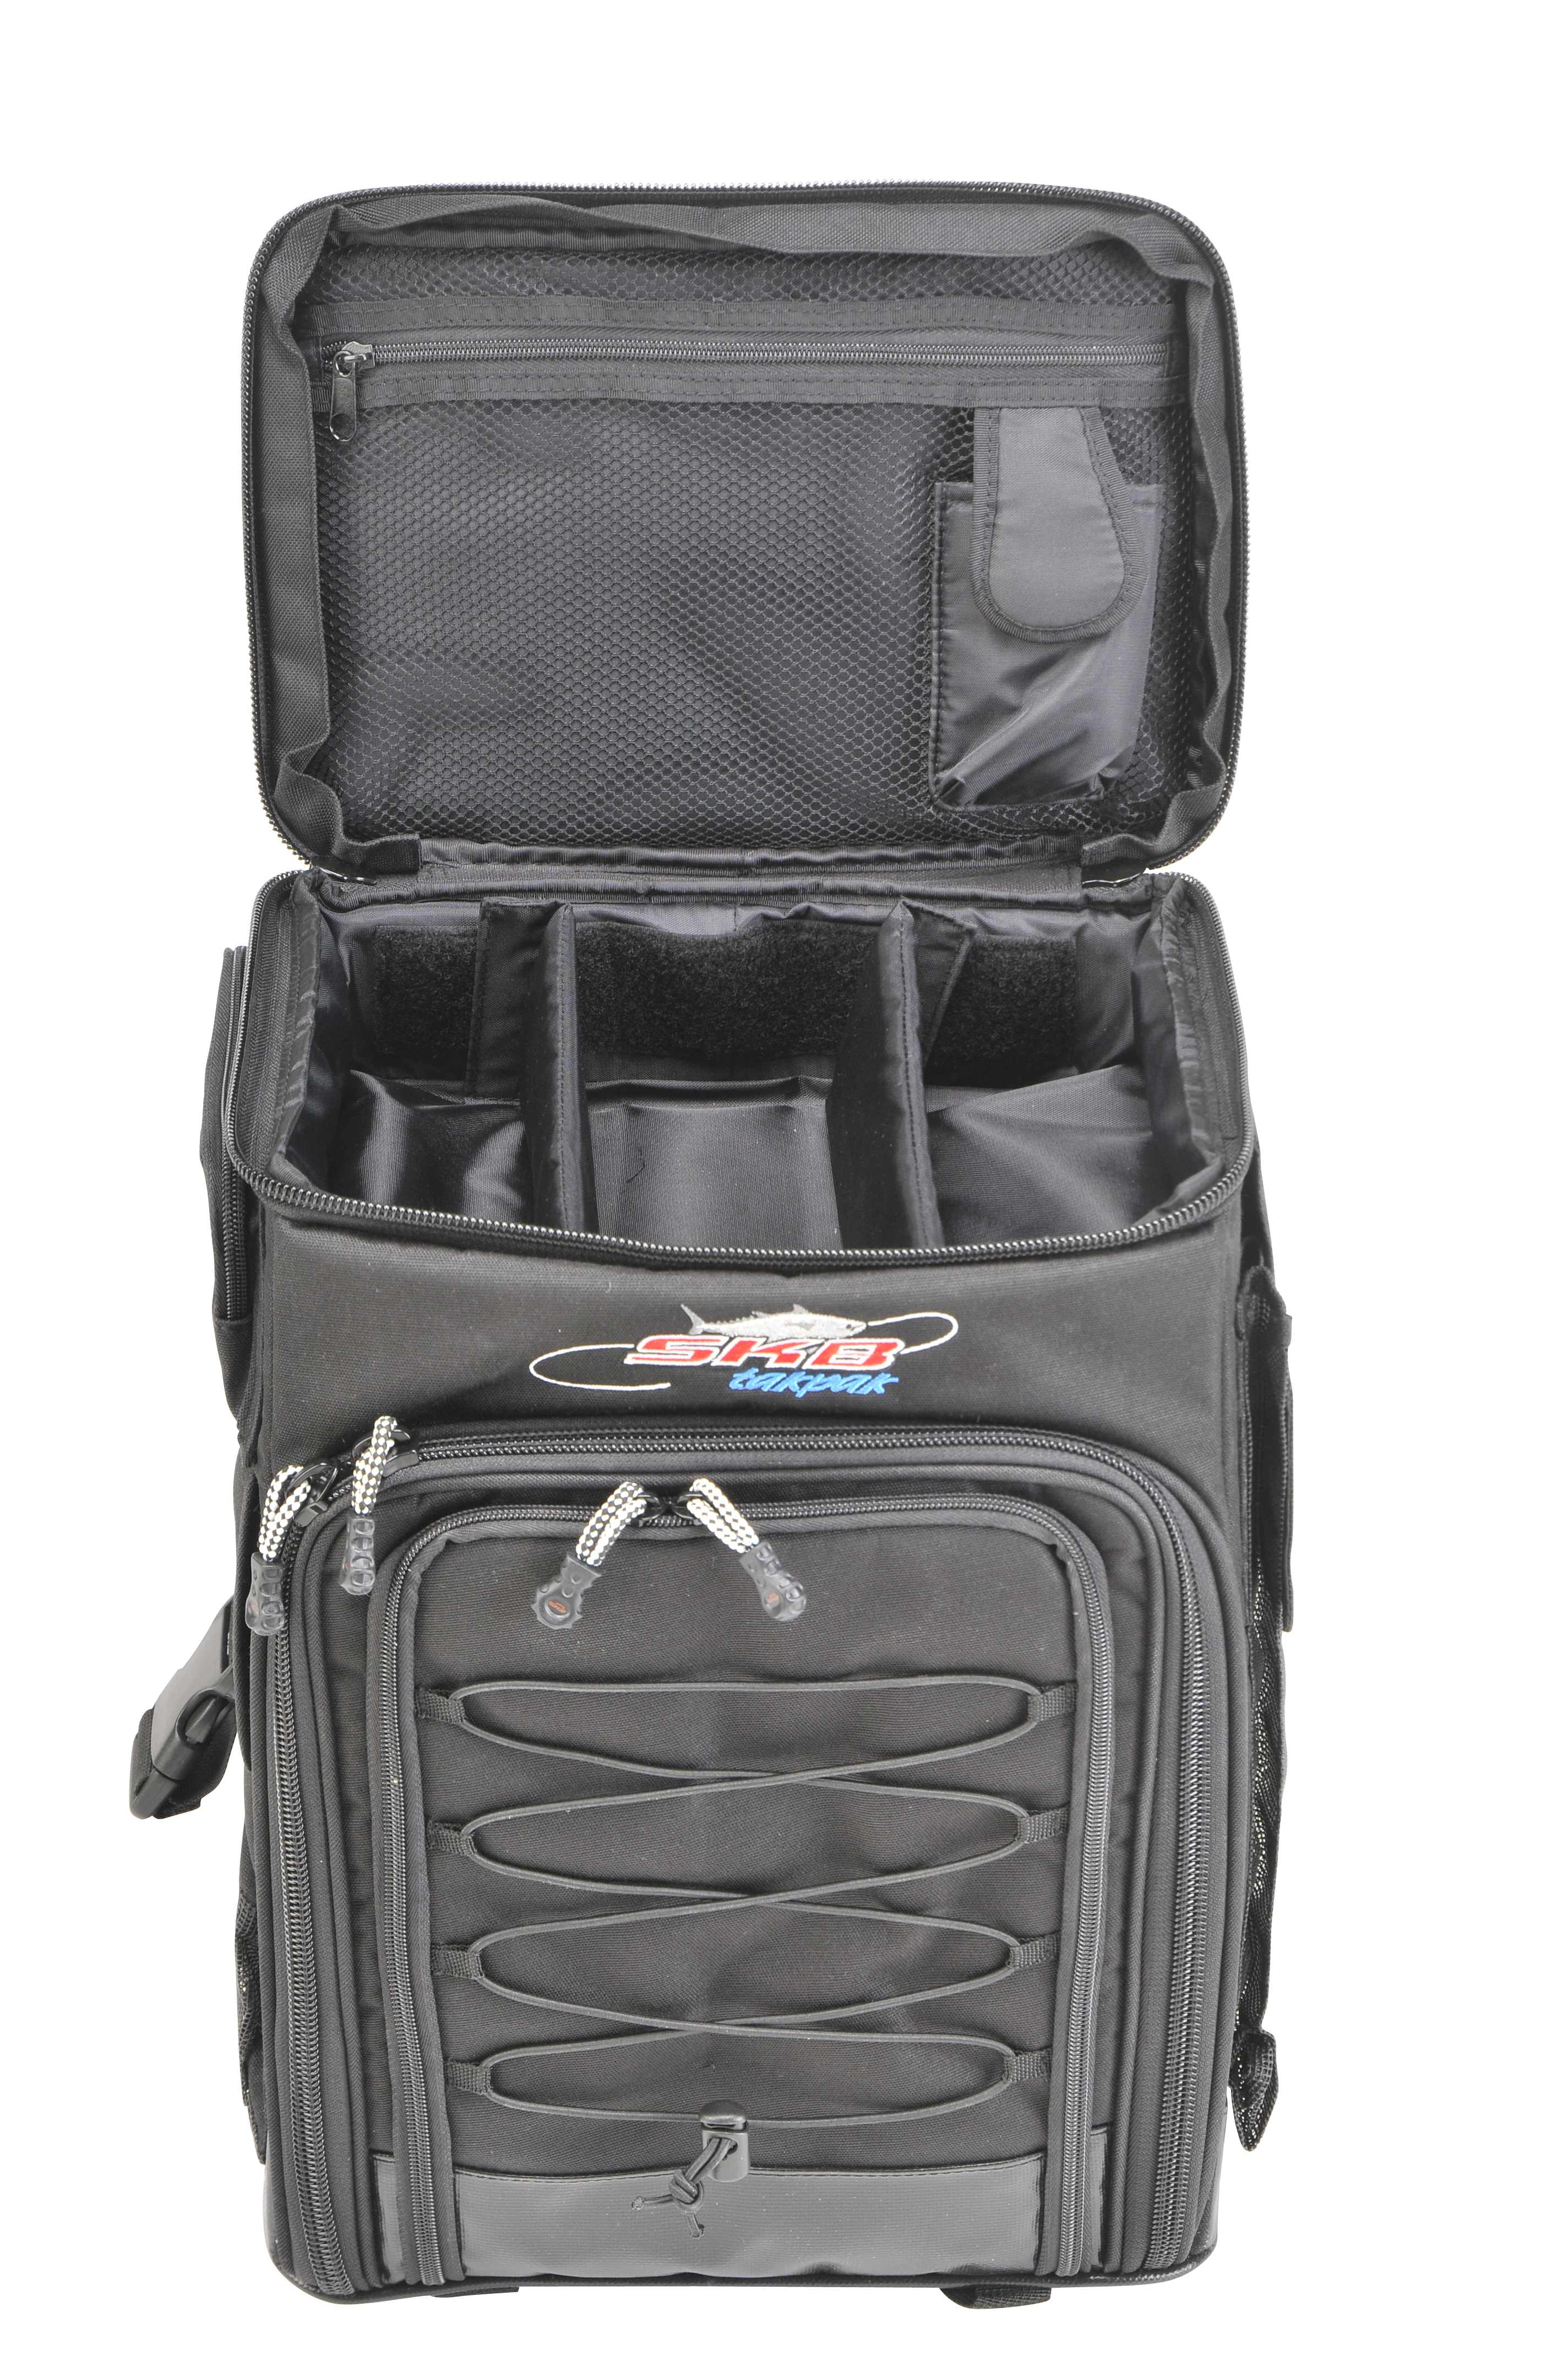 AFTCO's Tackle backpack has a place for everything